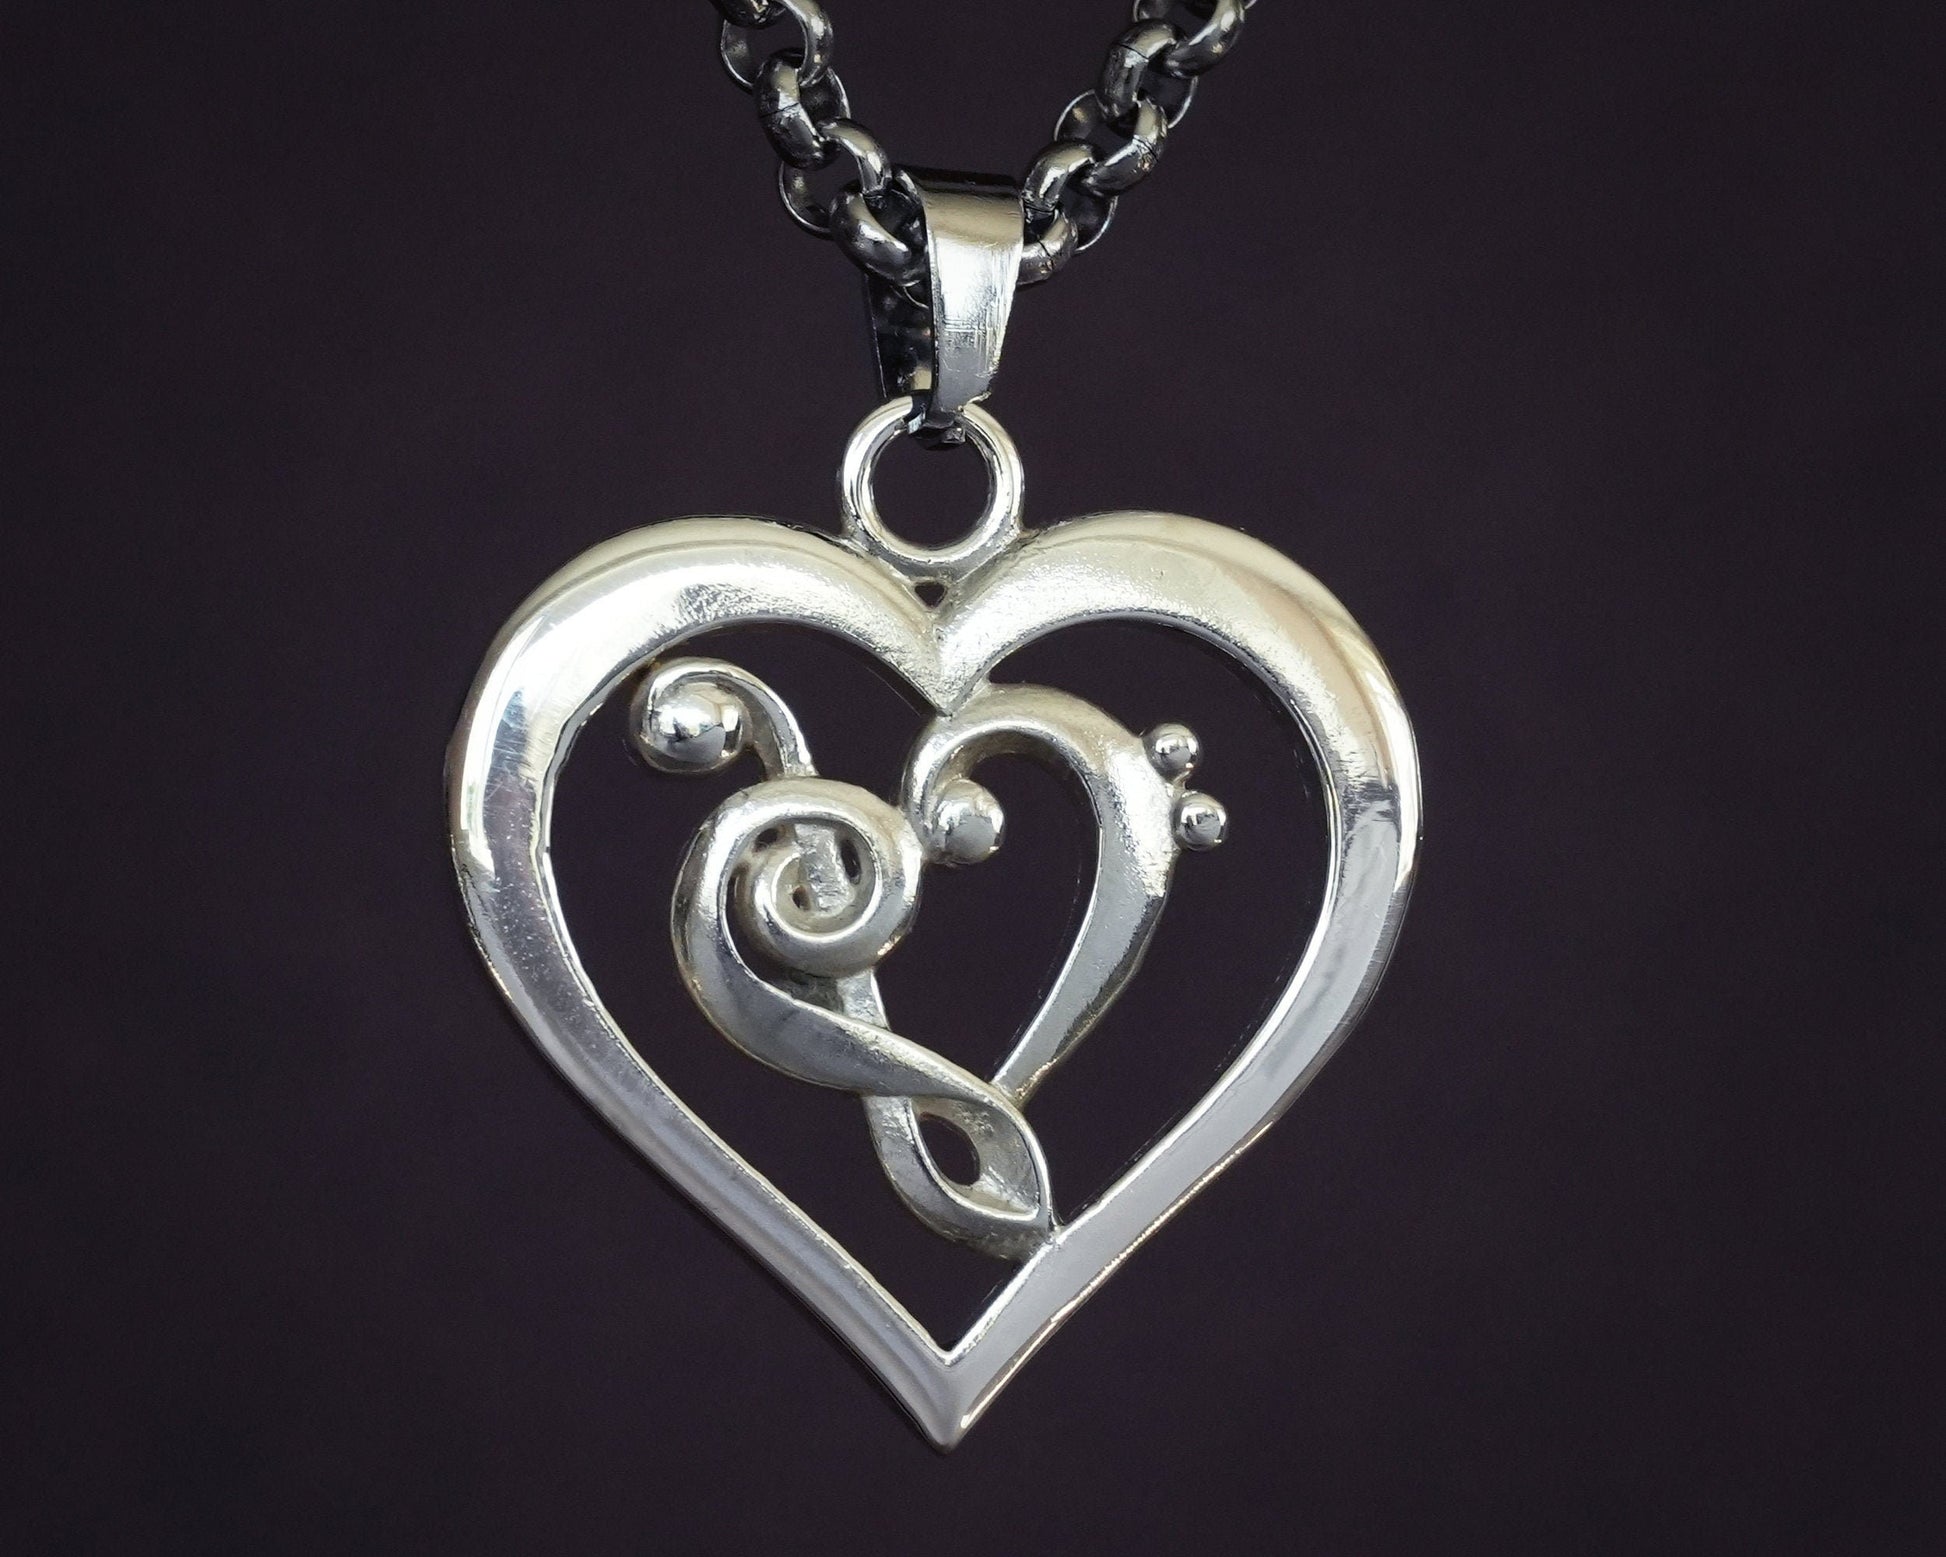 Treble & Bass Clef Heart Pendant Necklace Amulet for Her Women music brass / 925 Sterling Silver - Baldur Jewelry